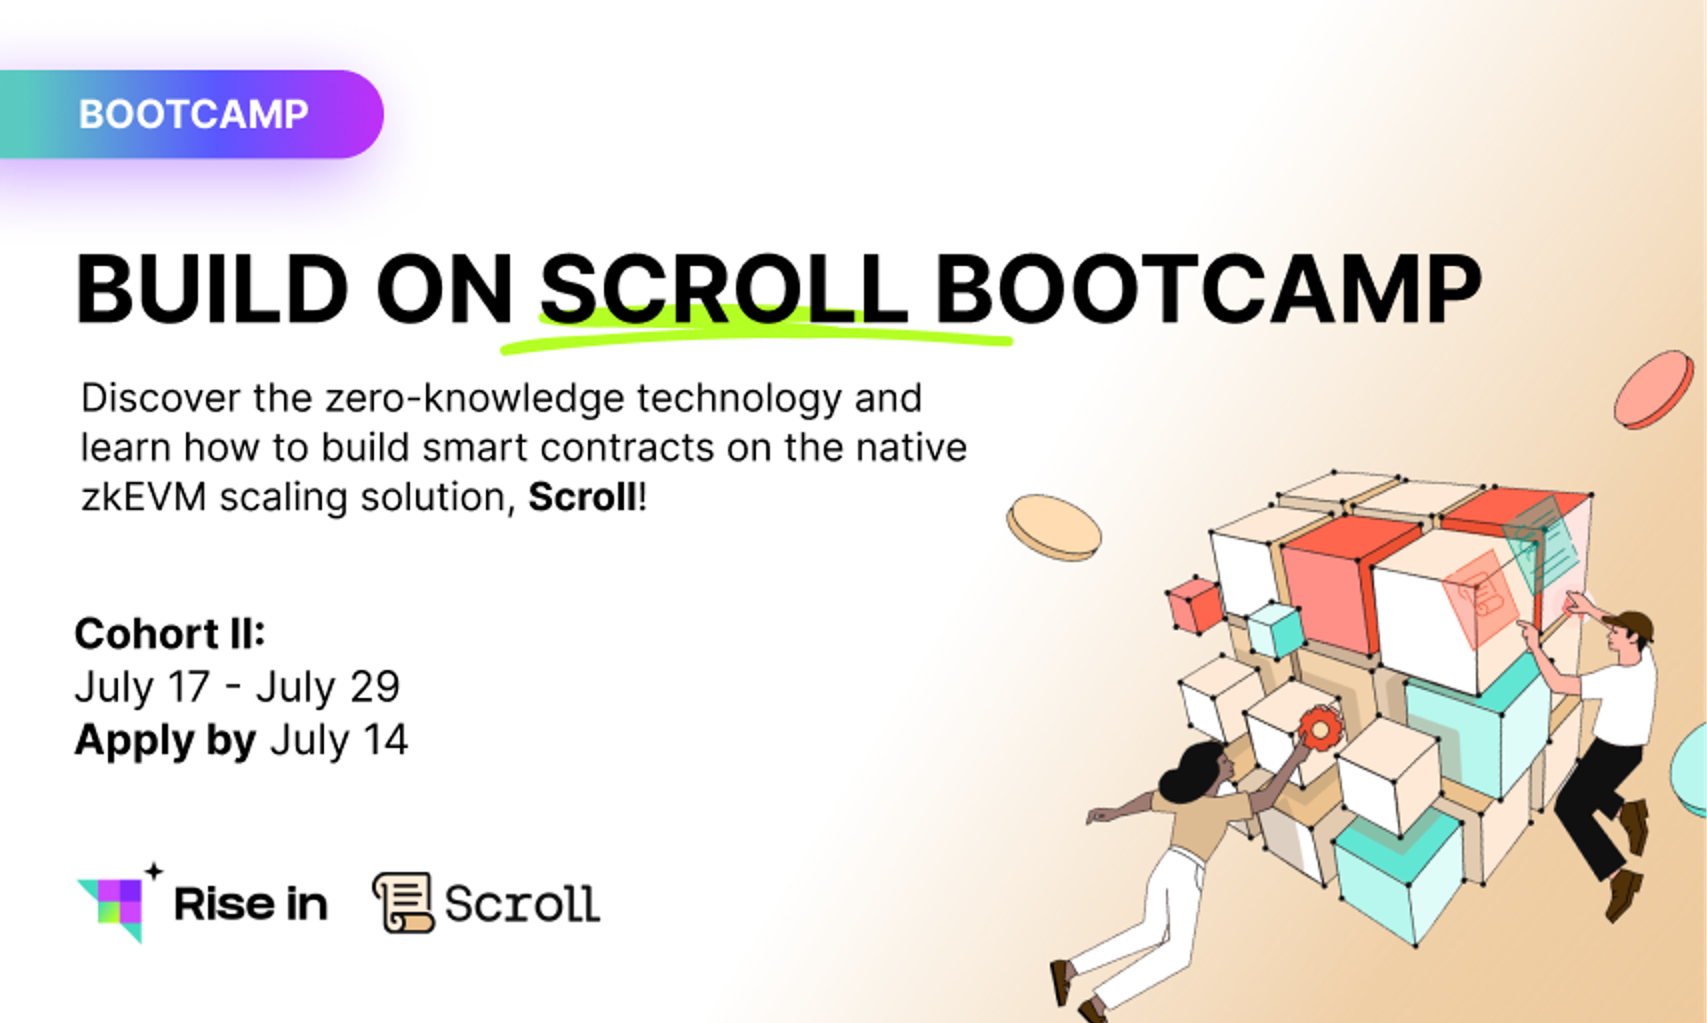 Build on Scroll Bootcamp